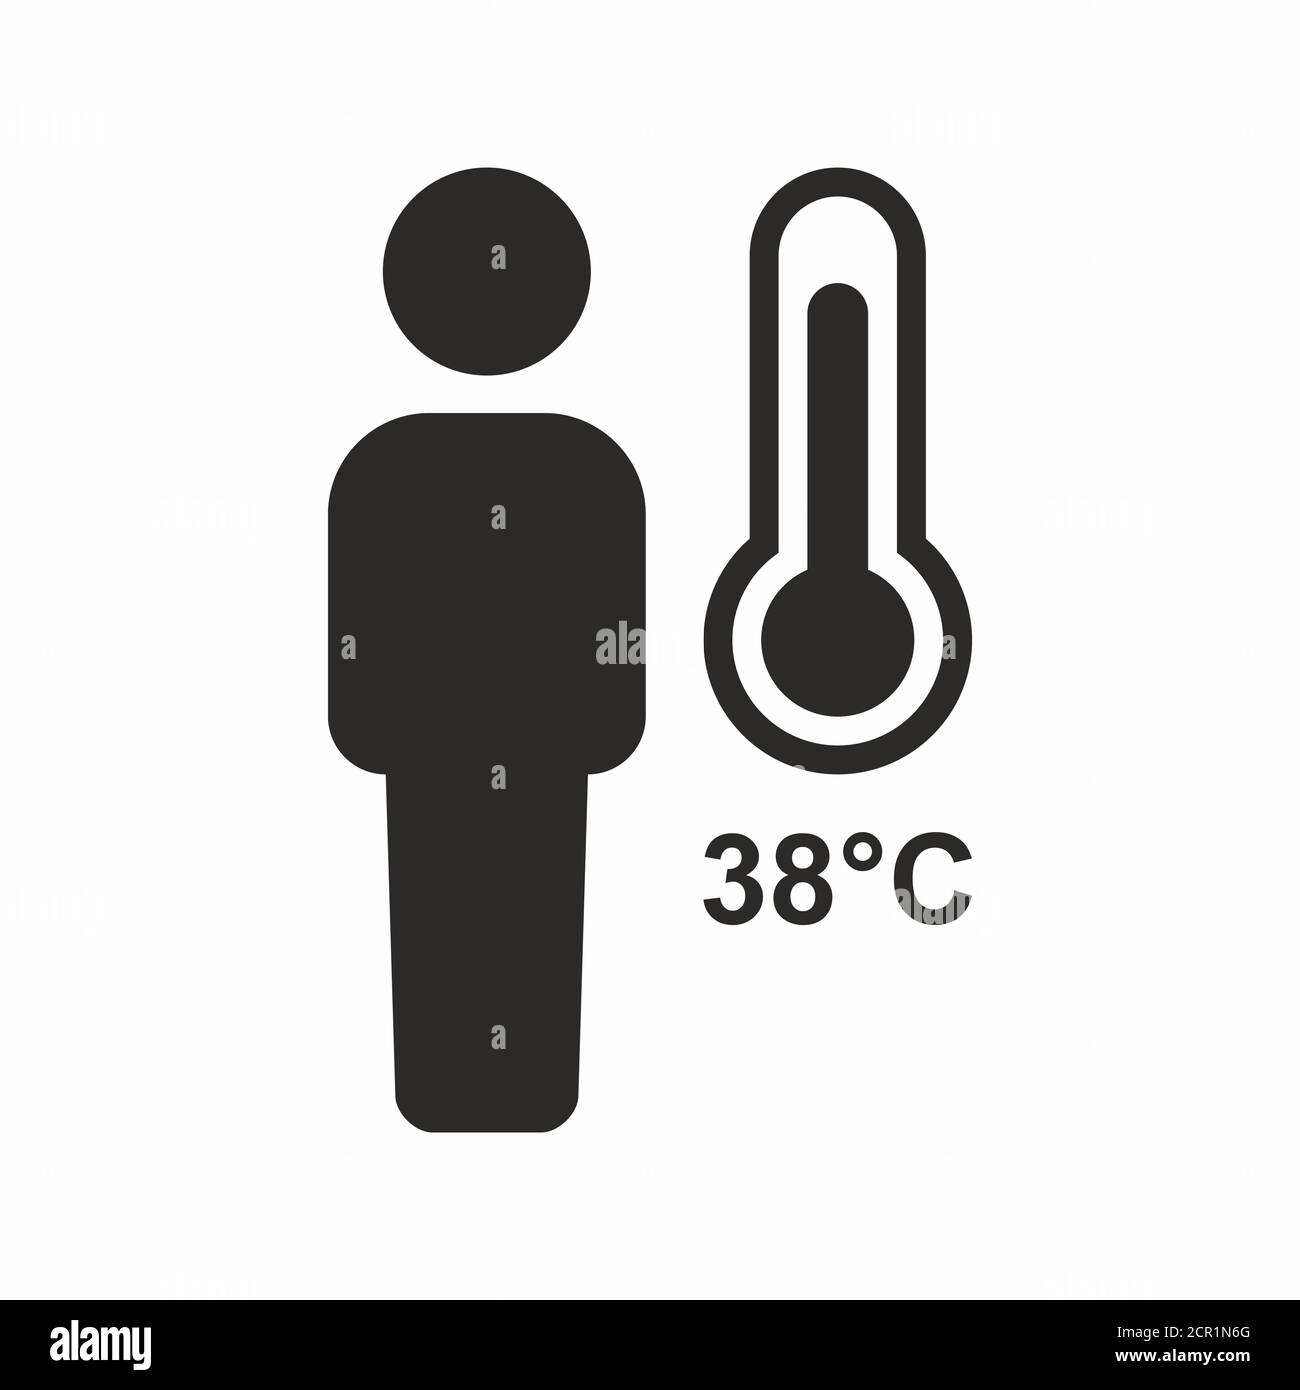 Fever, high temperature icon. Vector icon isolated on white background. Stock Vector